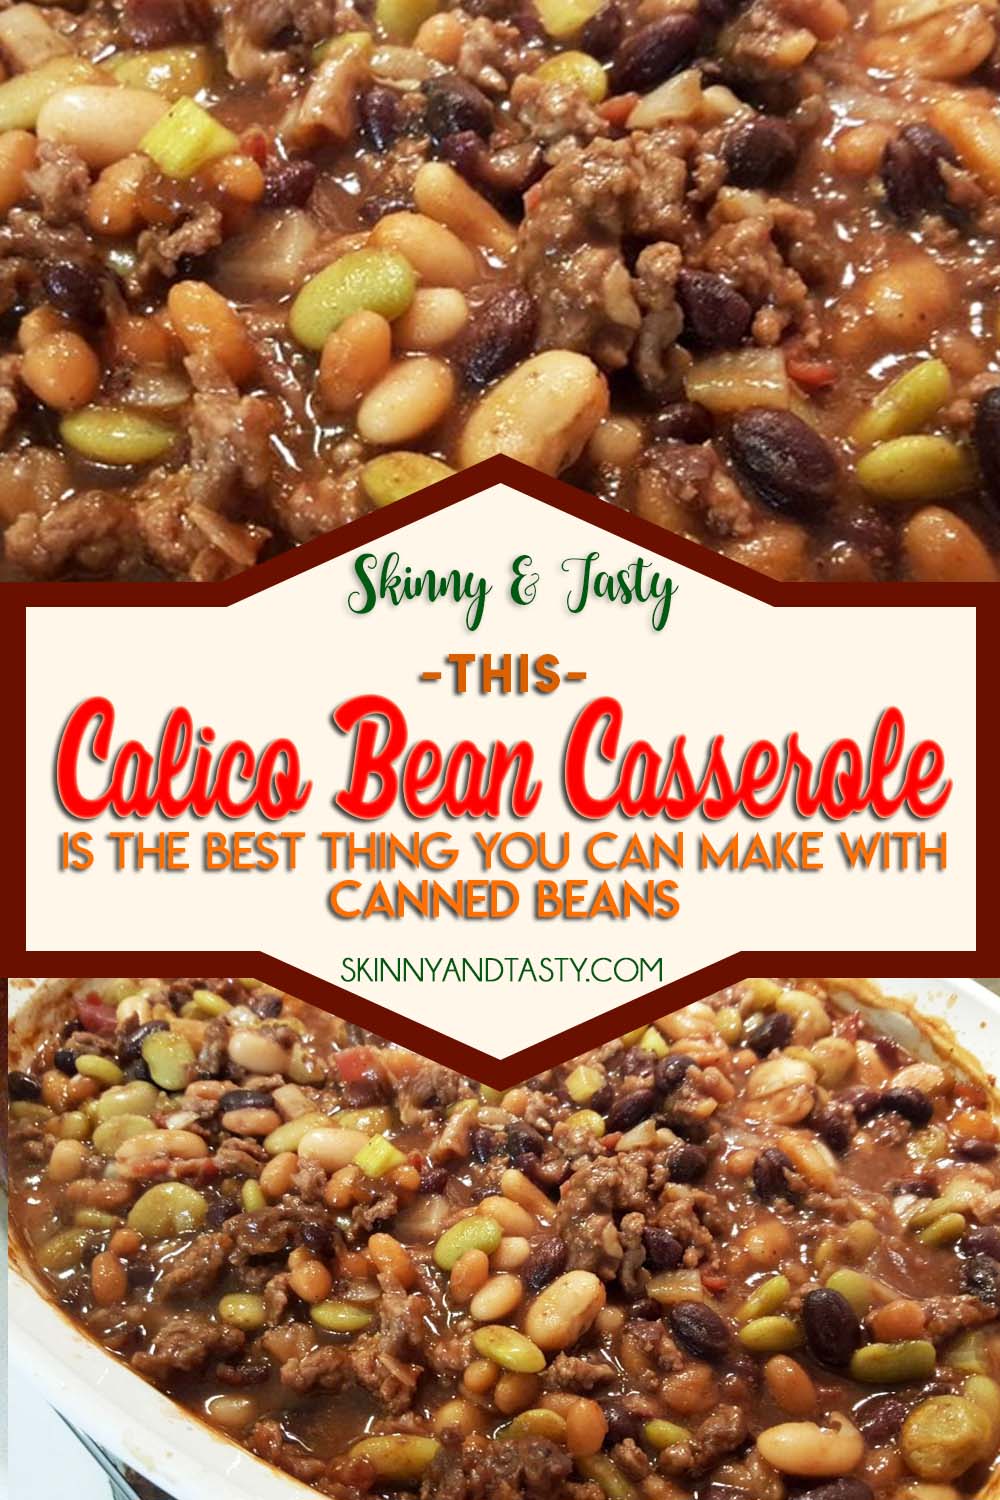 This Calico Bean Casserole Is the Best Thing You Can Make With Canned Beans